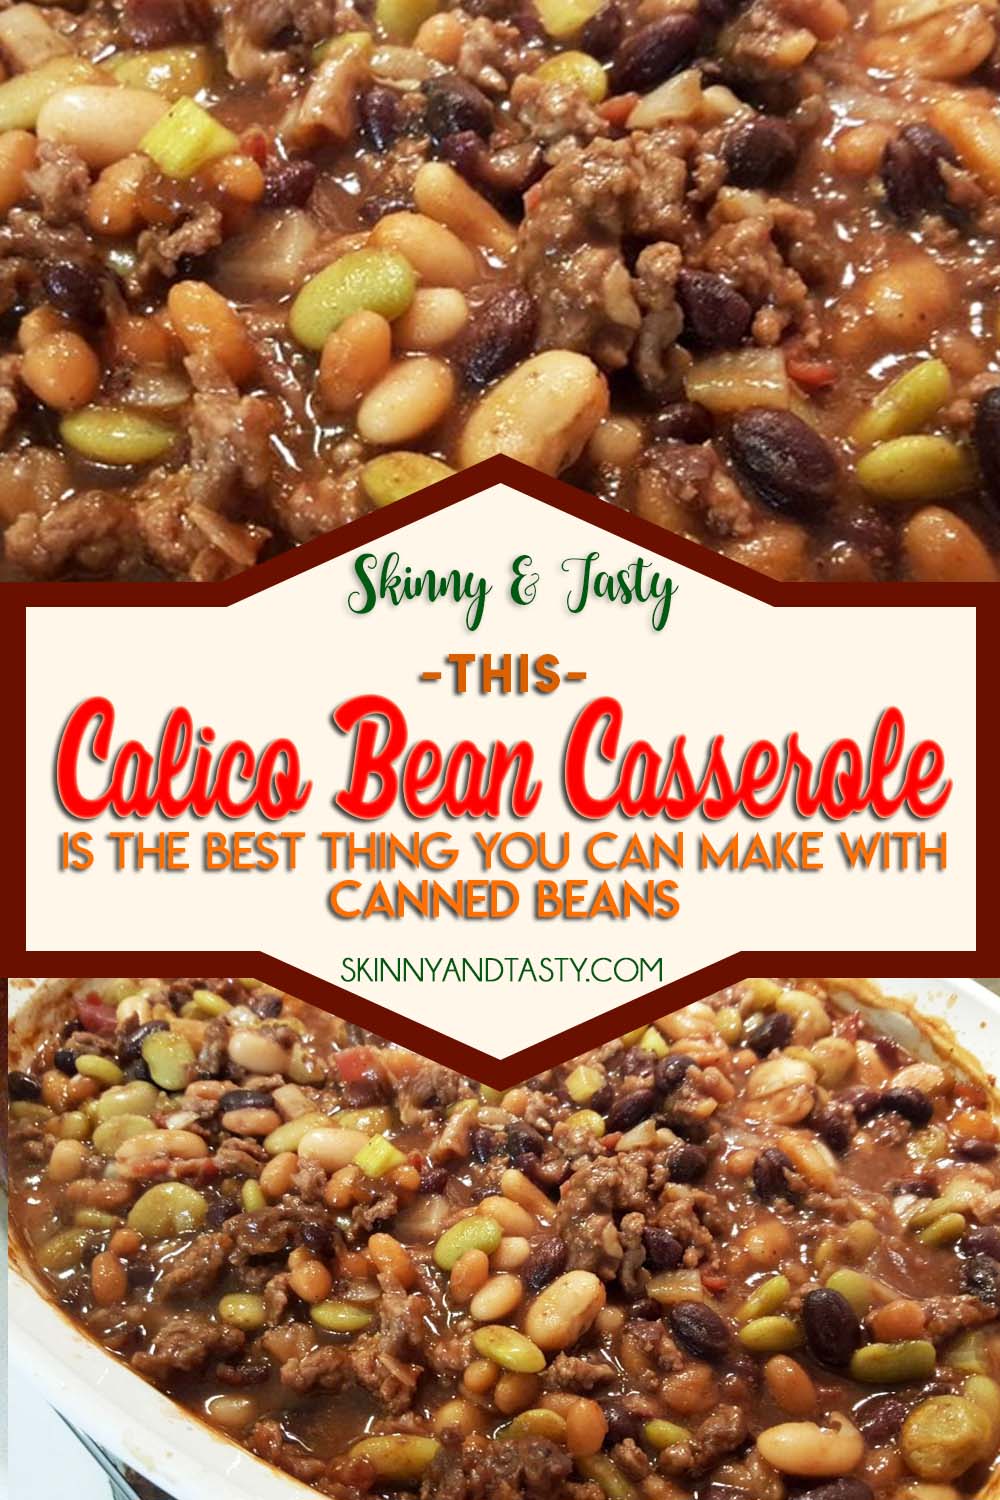 This Calico Bean Casserole Is the Best Thing You Can Make With Canned Beans